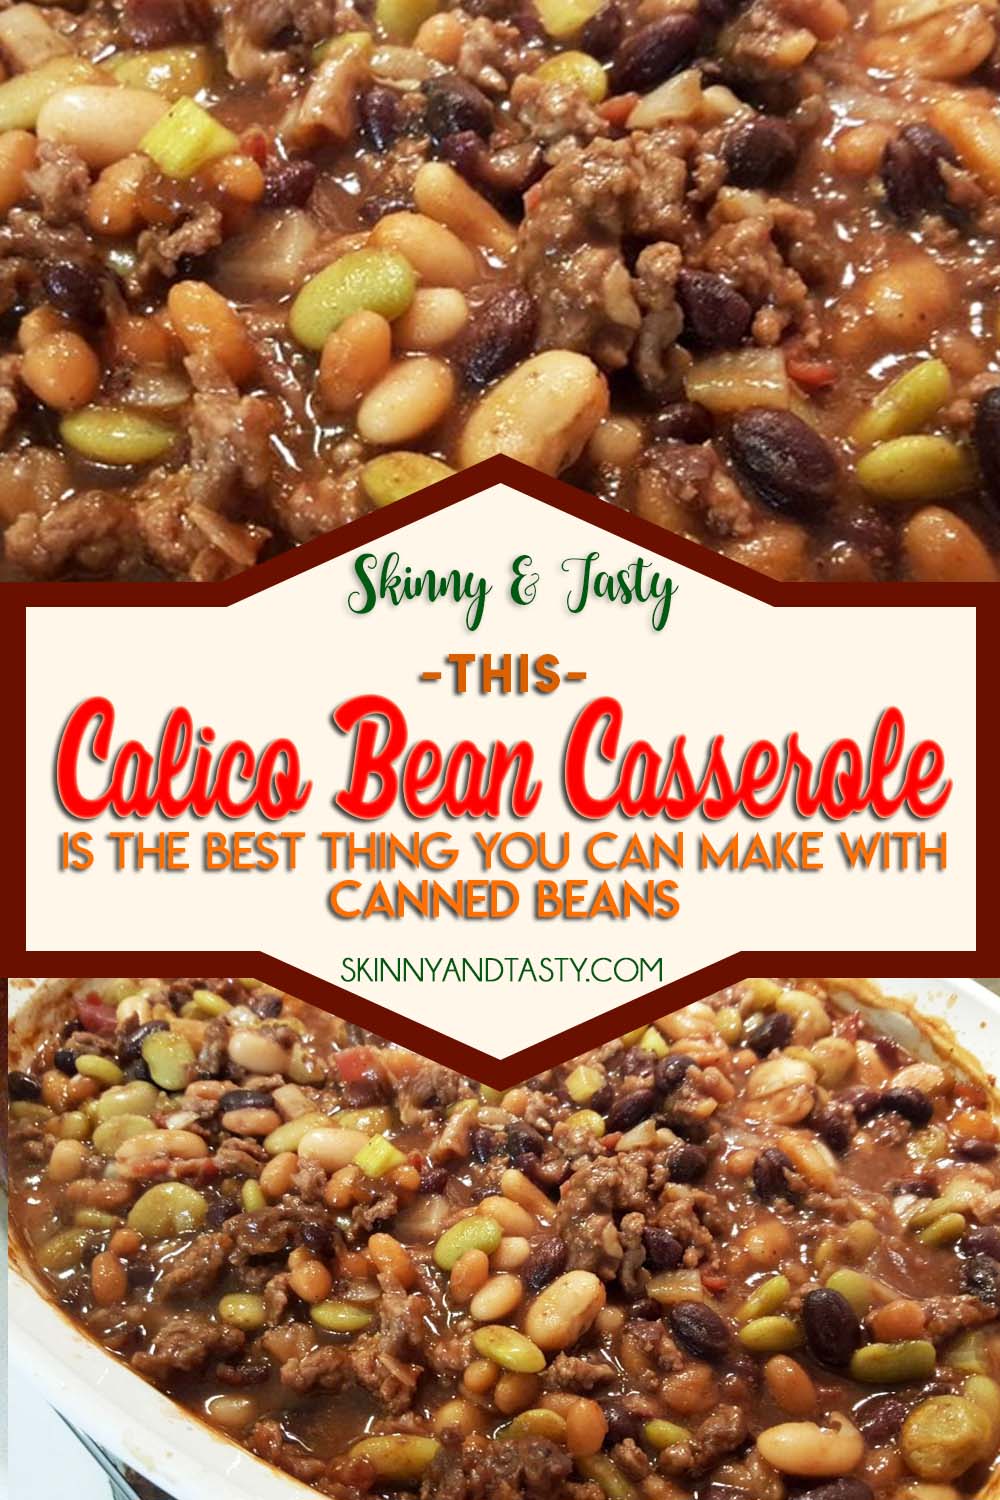 This Calico Bean Casserole Is the Best Thing You Can Make With Canned Beans